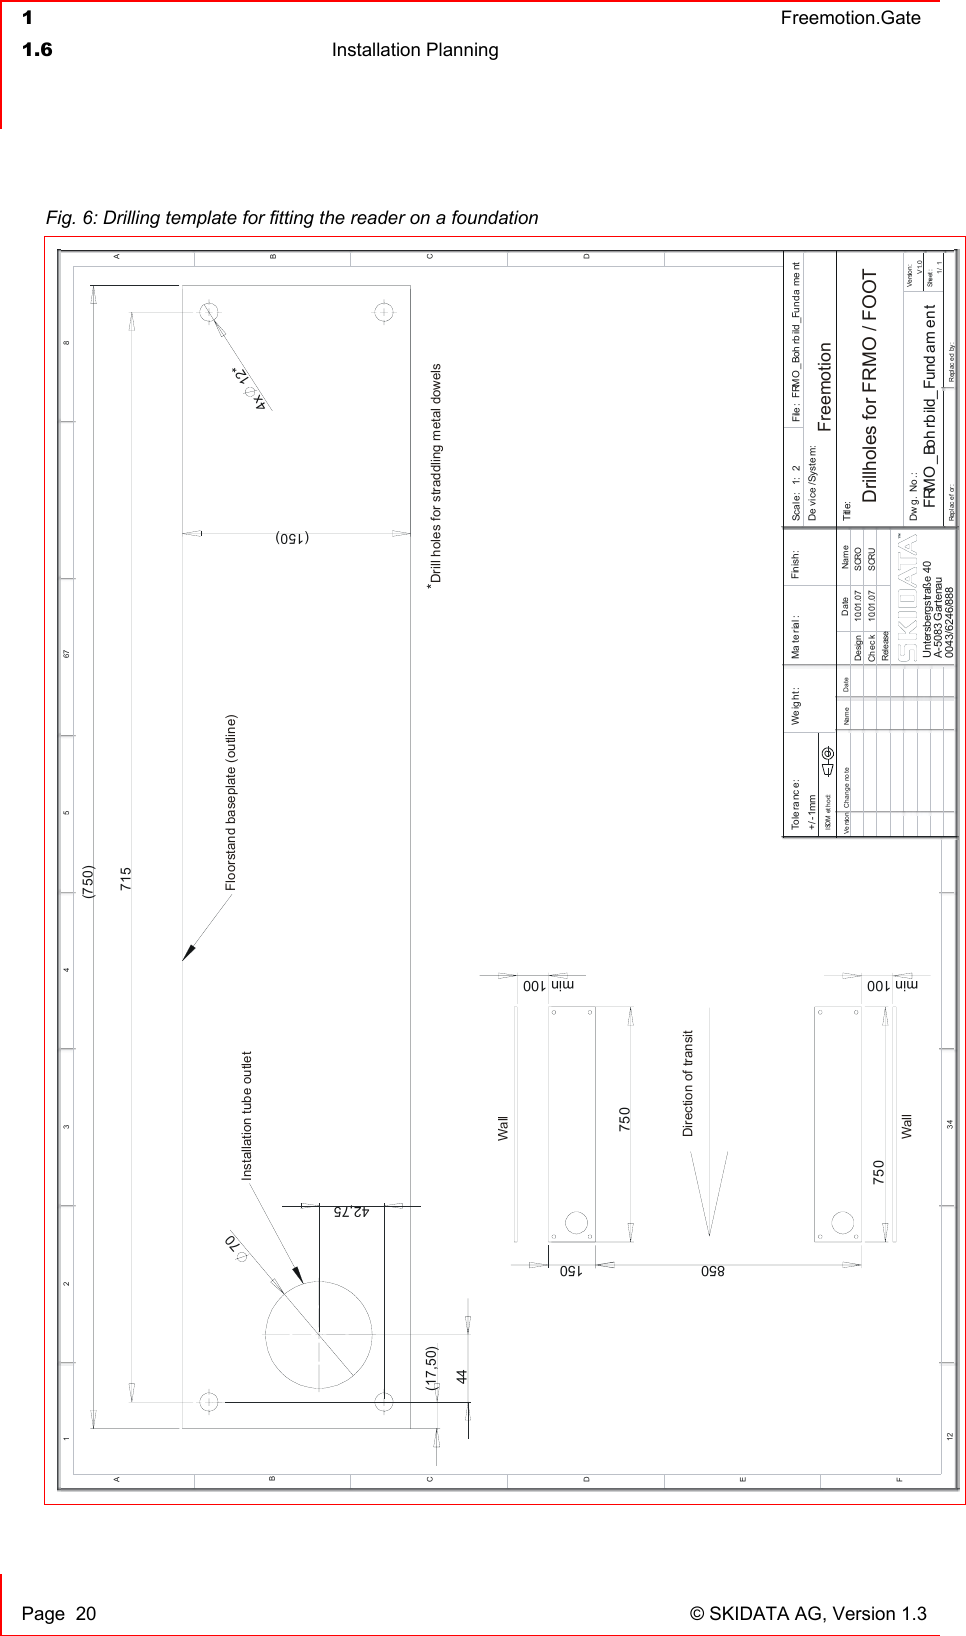  1  Freemotion.Gate  1.6 Installation Planning     Page  20  © SKIDATA AG, Version 1.3 Fig. 6: Drilling template for fitting the reader on a foundation *71542,75)*1270(4x(75044150)(17,50)DEFC12 34BA321 5CD467 8ABReplac ed by:Replac ef or:Title:DateNameCh an ge not eVe rsionScal e: File :1: 2 FRMO _Boh rb ild _Fun da me ntDe vice /Syste m:FRMO _Boh rbild_Fund am en tDw g. No .:V1.0Ve rsi on:Sheet :1/ 10043/6246/888Ma te rial : Finish:DateChec kDesignReleaseName10.01.0710.01.07SCRUSCROWe ig ht :+/ -1mmTo le ra nc e :ISOM ethod:Untersbergstraße 40A-5083 Gartenau850750min 010 min 010150750Installation tube outletFloorstand baseplate (outline)WallDirection of transitWallDrill holes for straddling metal dowelsDrillholes for FRMO / FOOTFreemotion